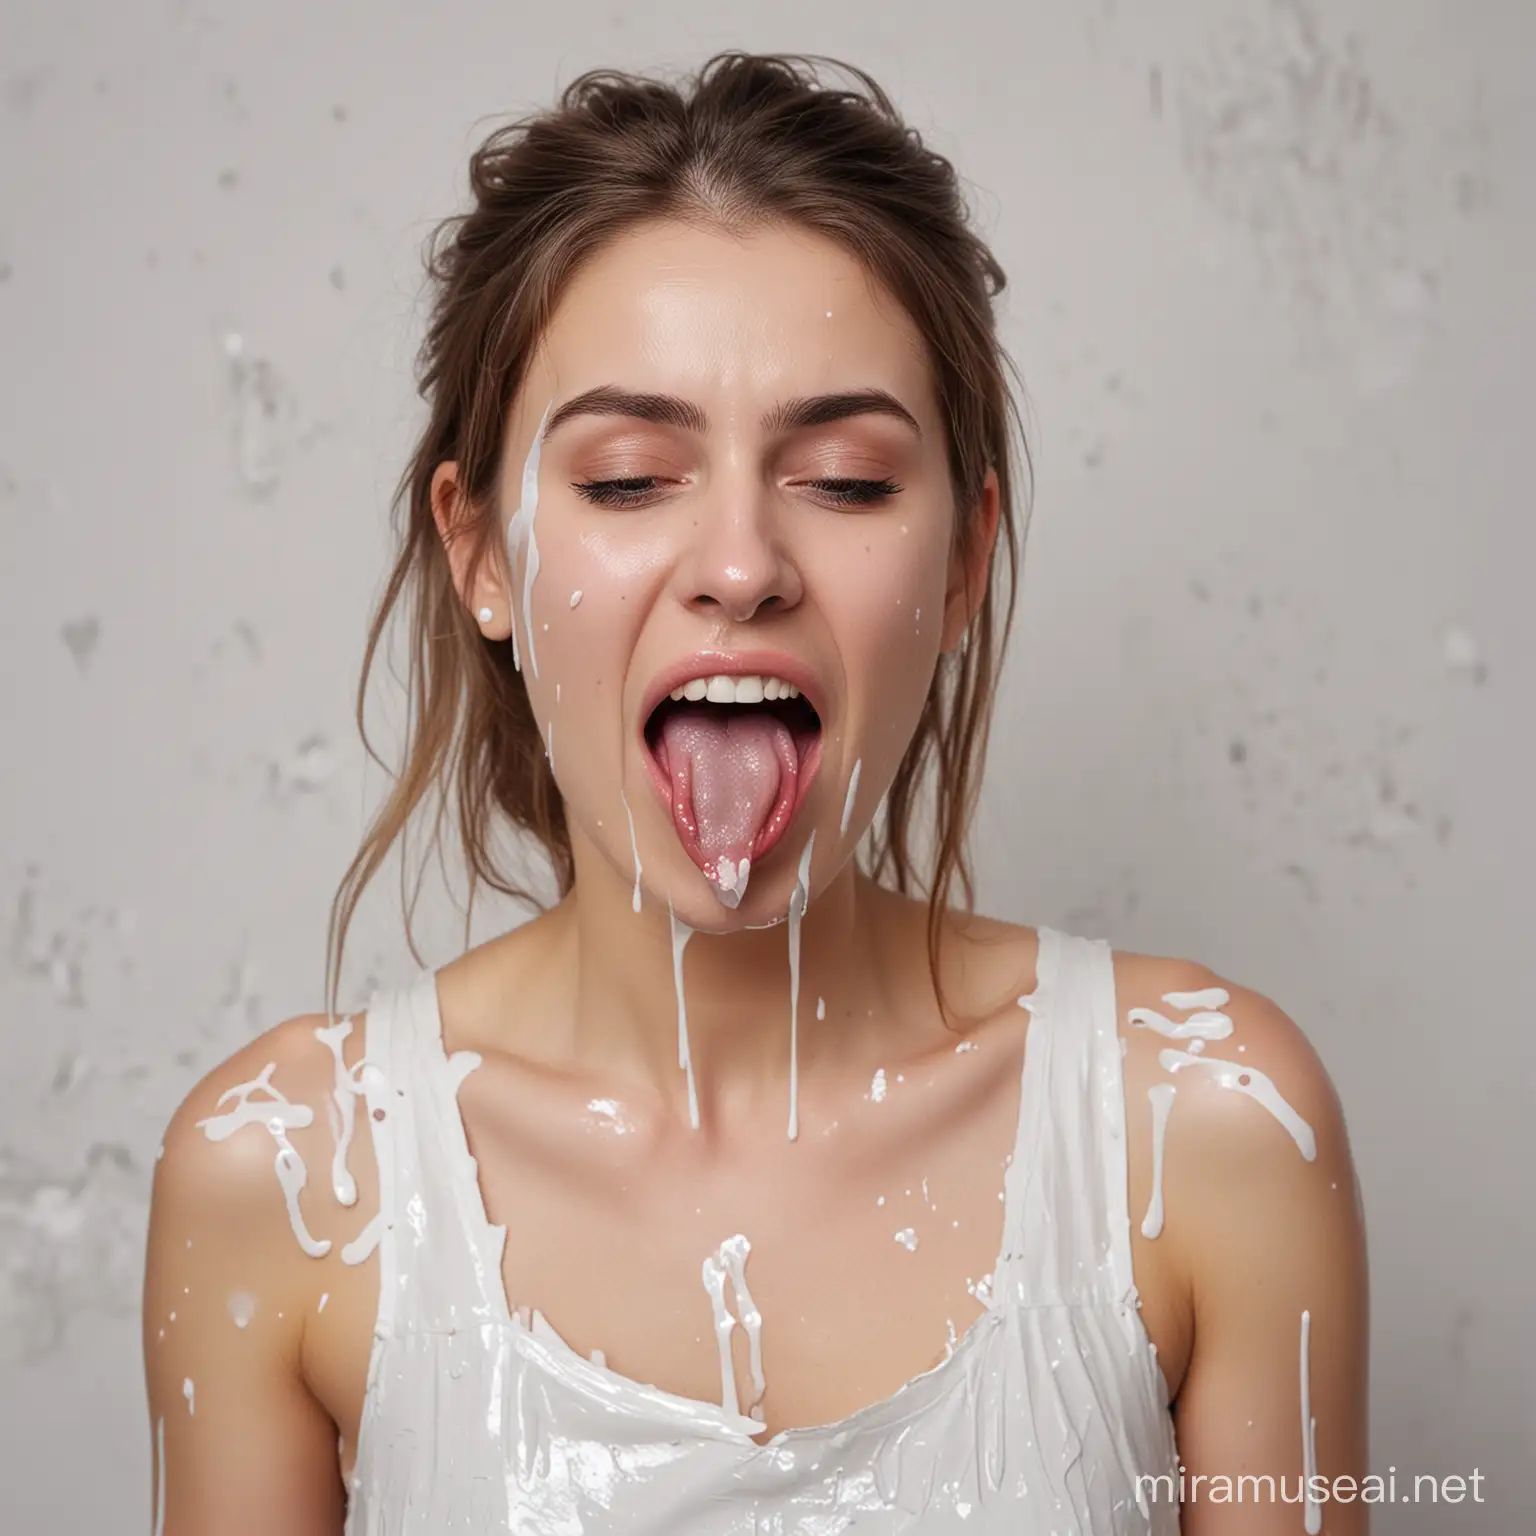 Woman wearing dress, her tongue stained with sticky white paint